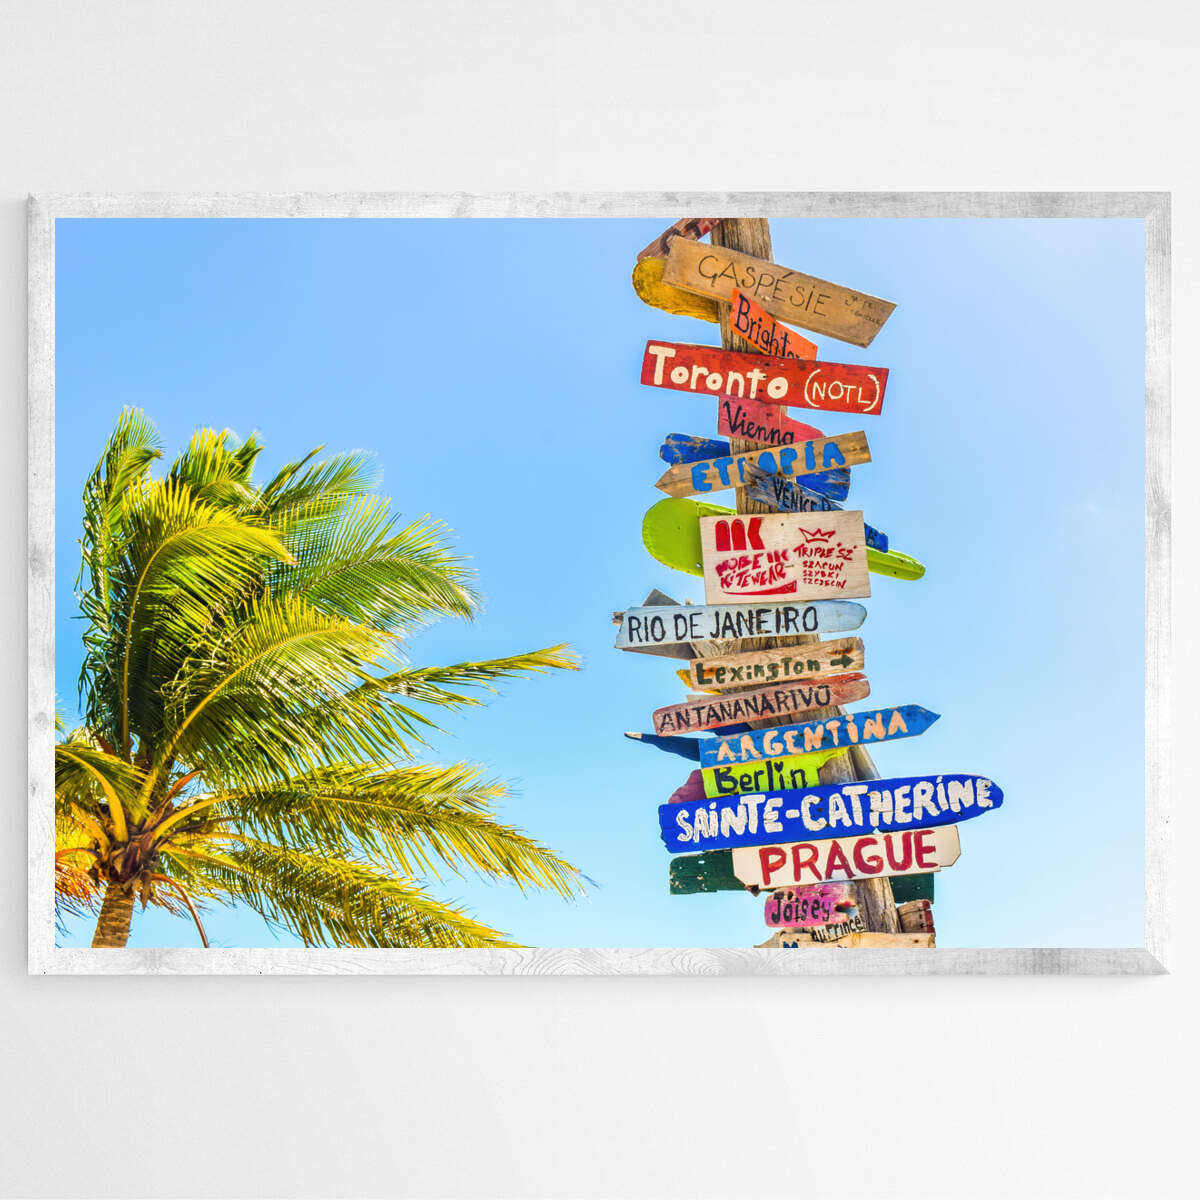 Direction Sign Long Bay Beach | Beachside Wall Art Prints - The Canvas Hive